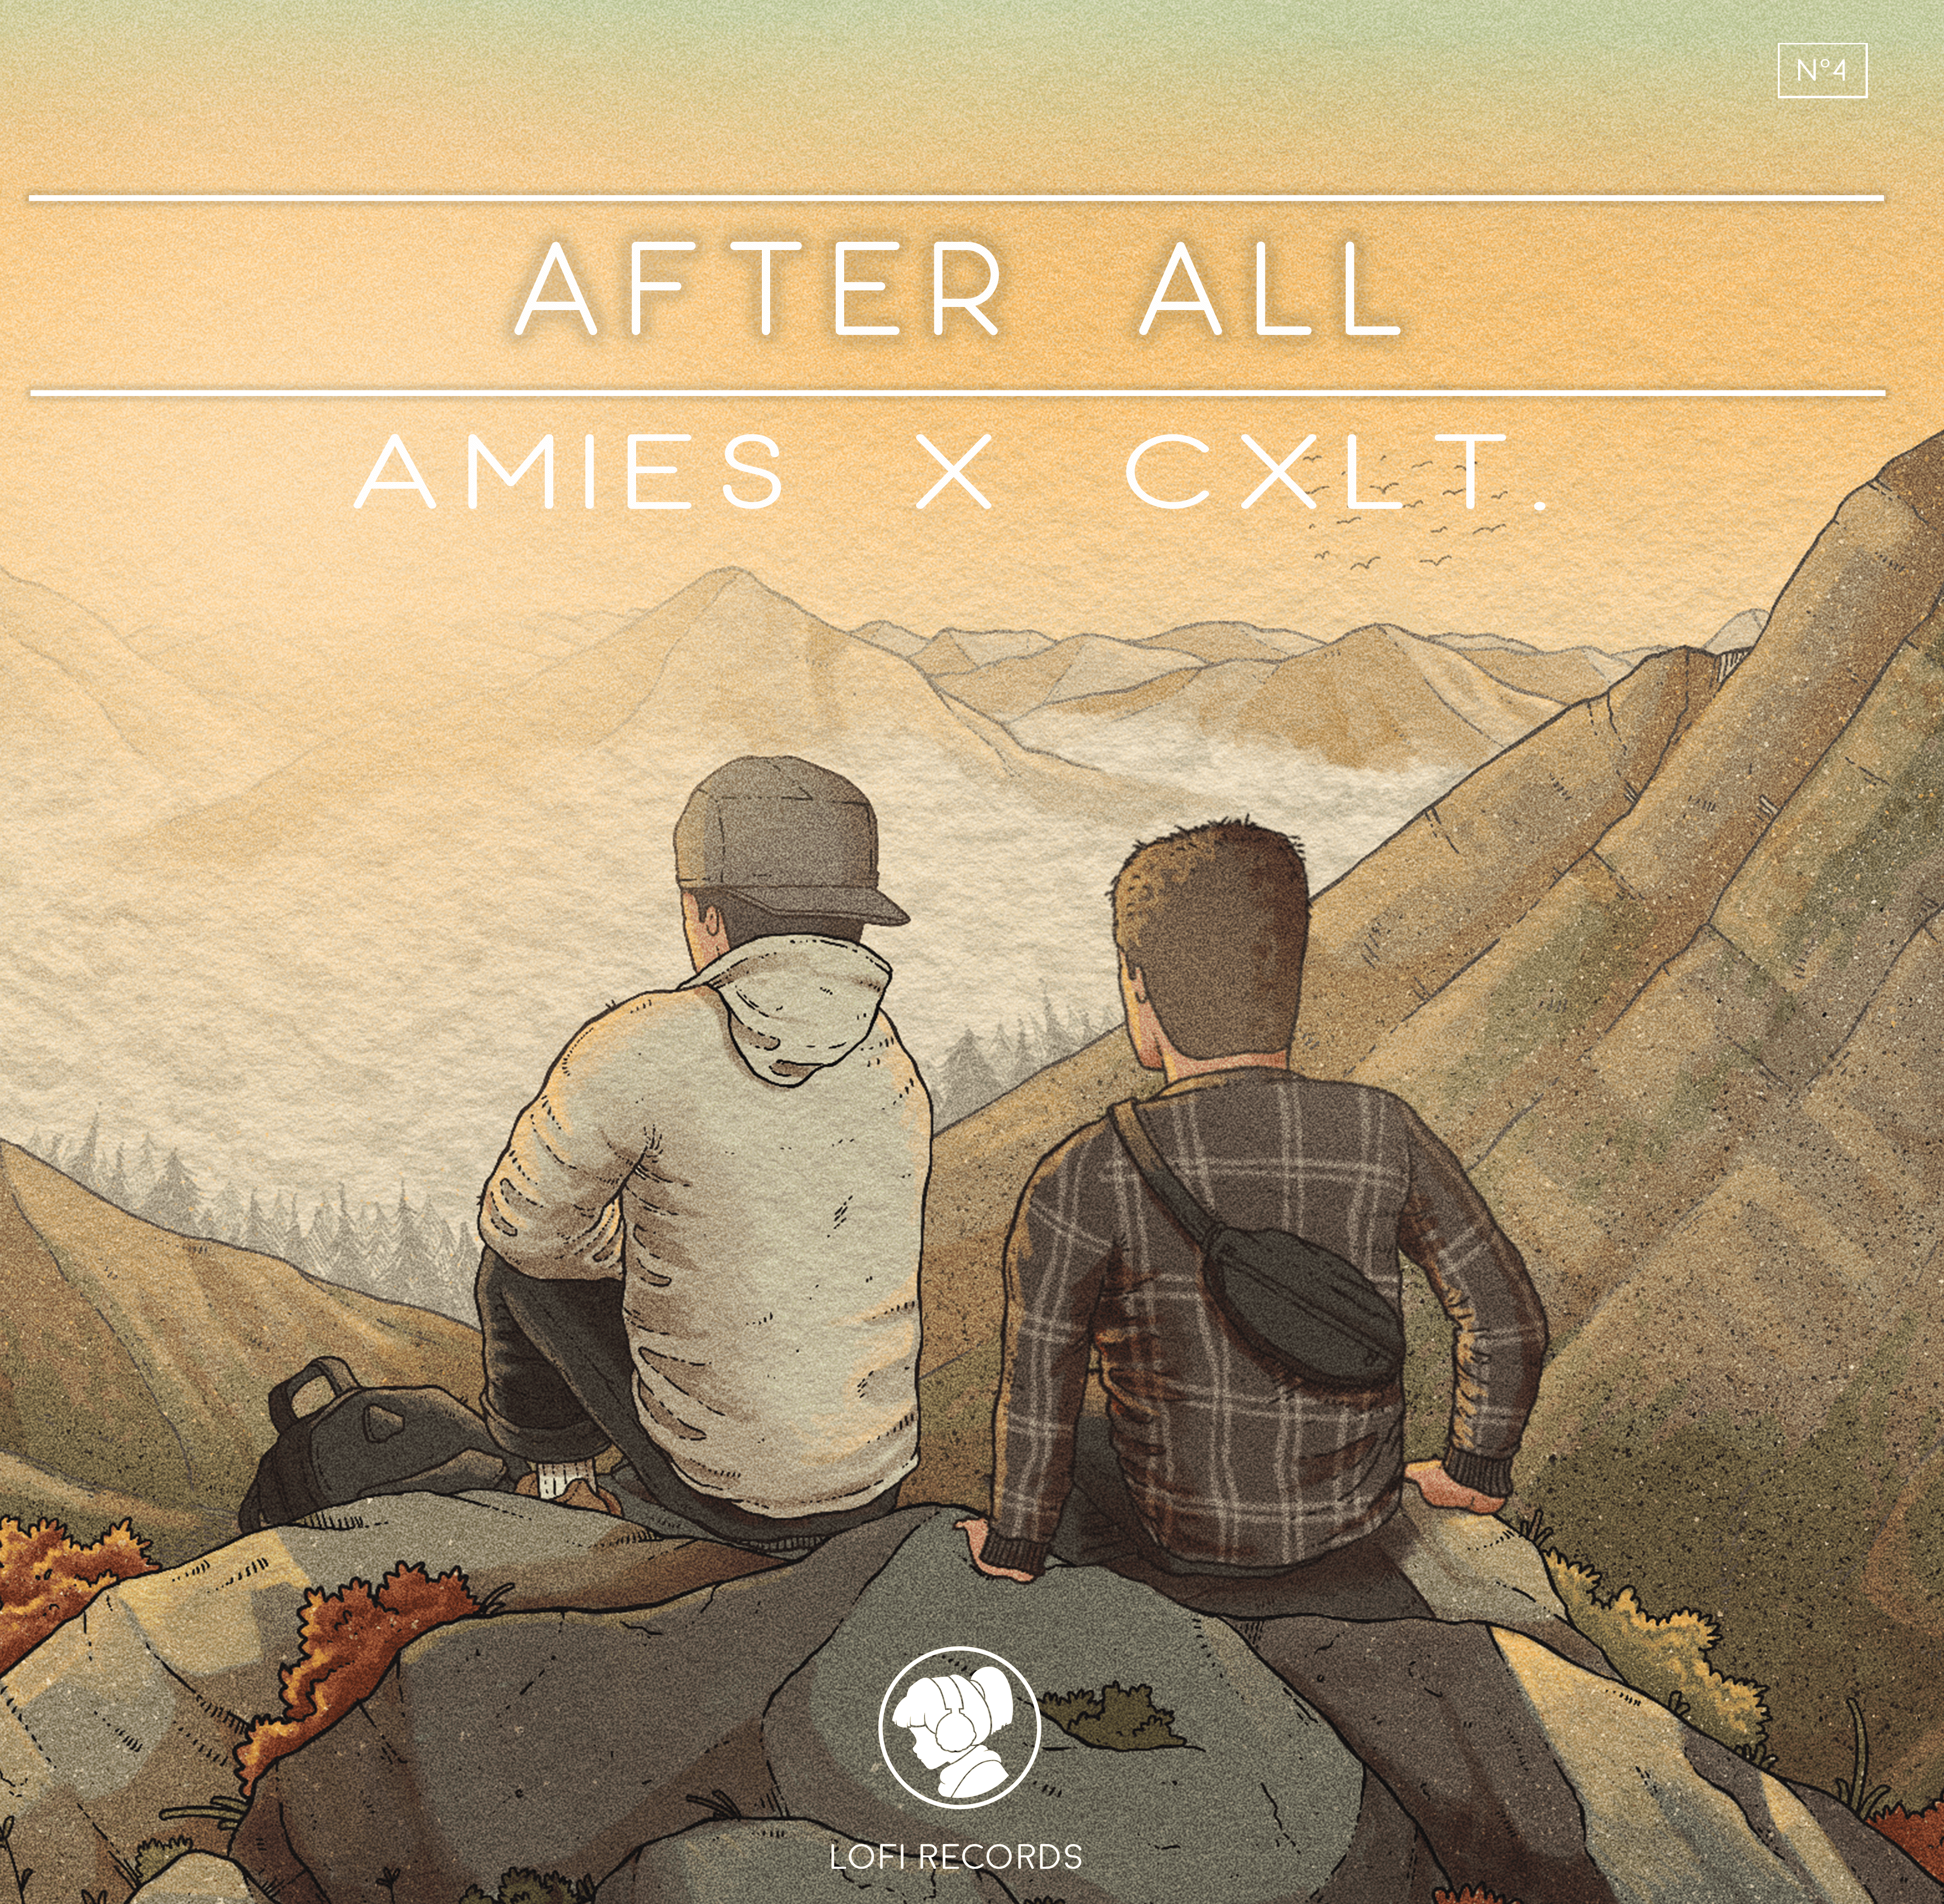 After All - amies x cxlt.